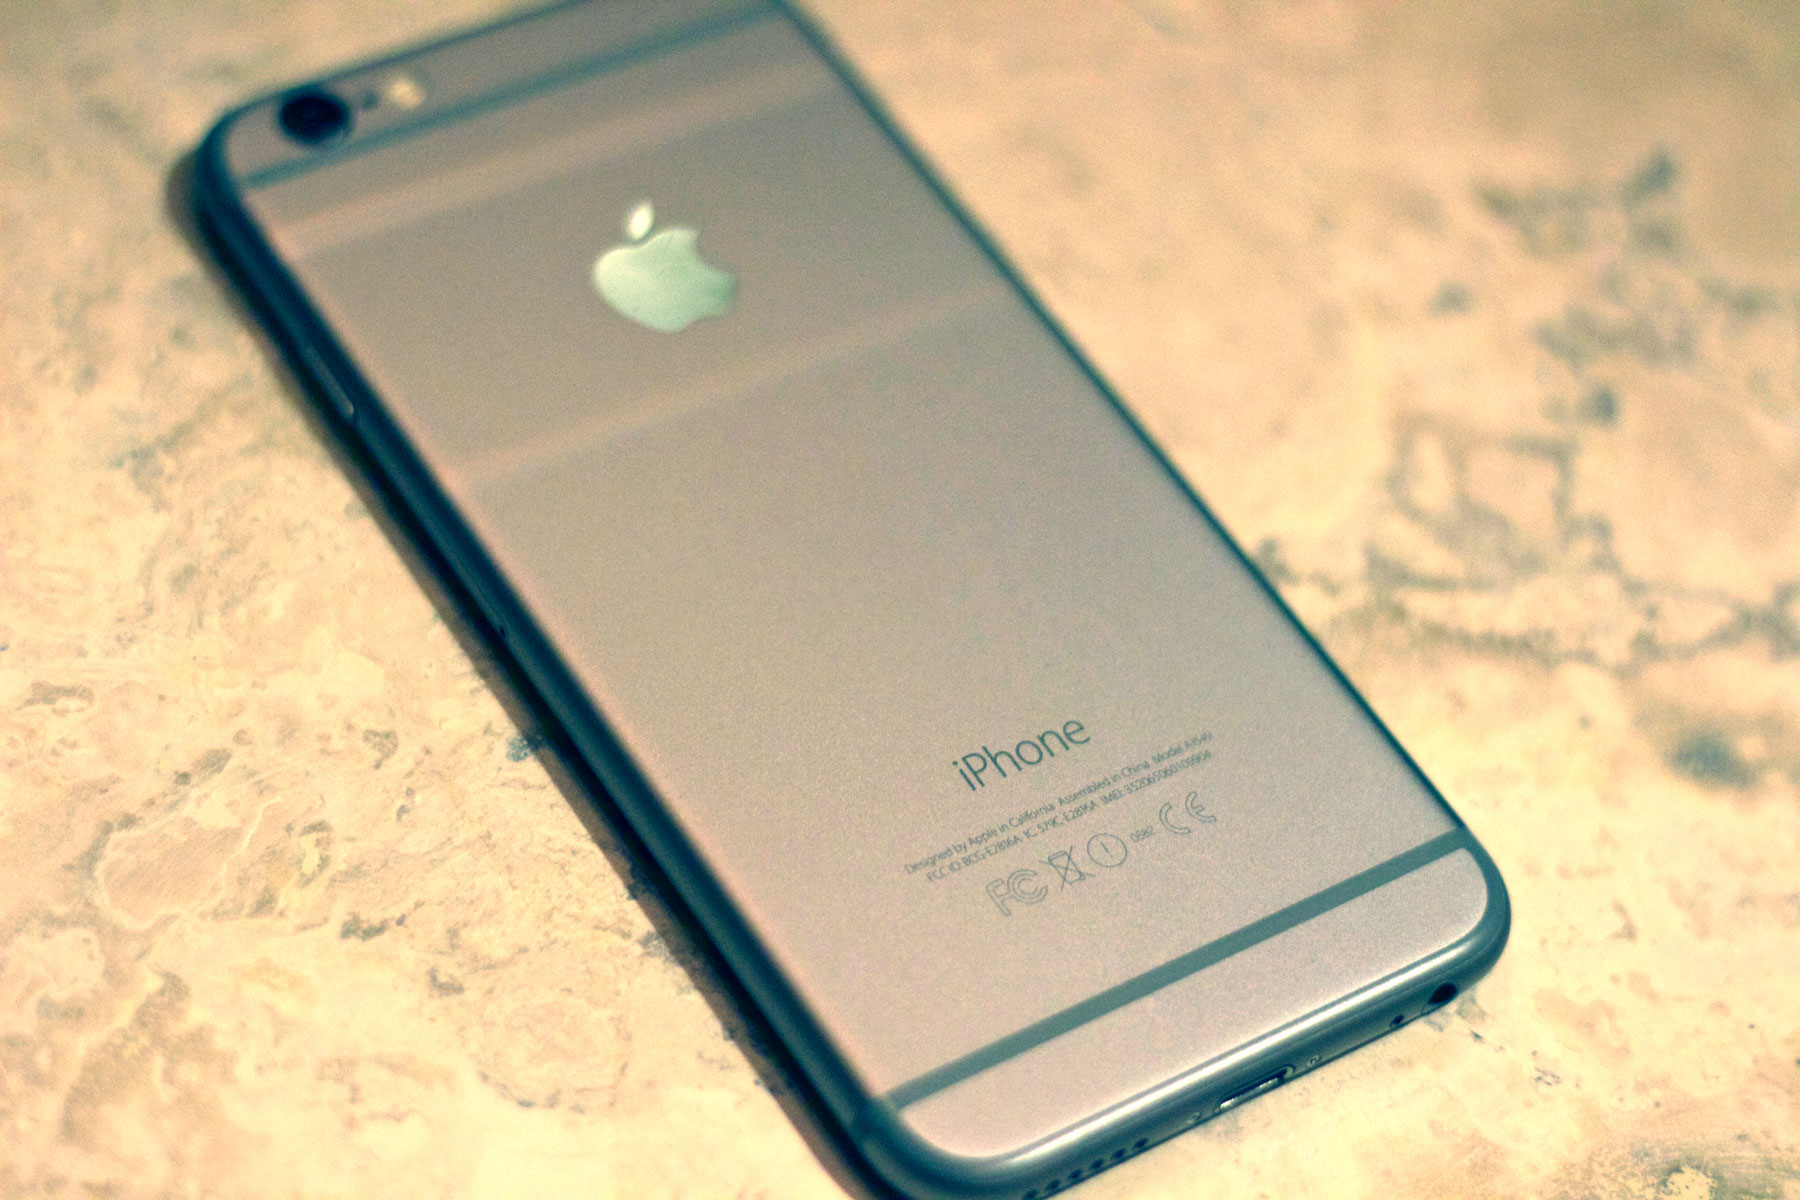 Back of the iPhone 6